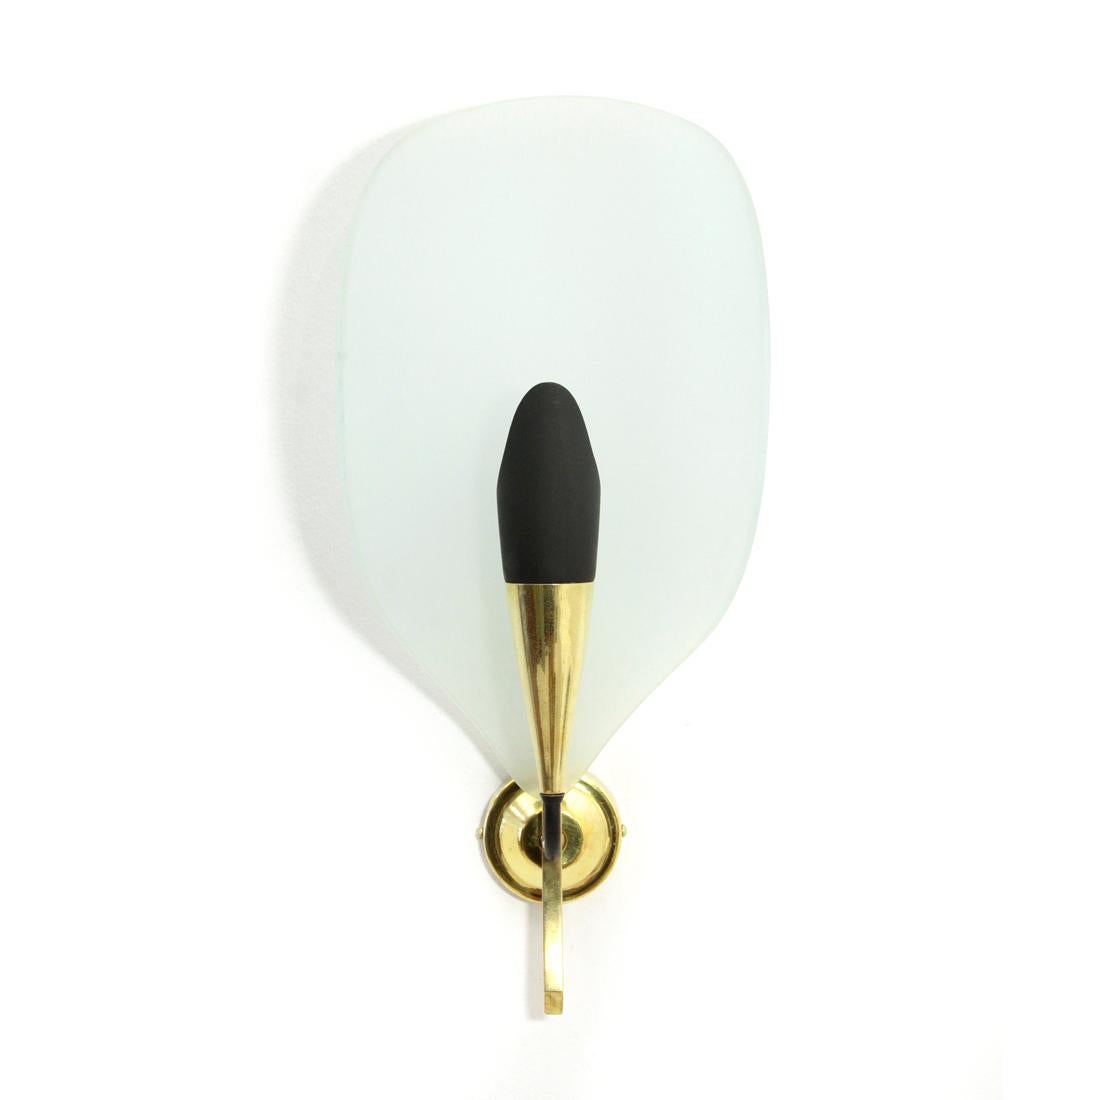 Italian manufactured wall lamp produced in the 1950s.
Wall support in brass and black painted metal.
Diffuser in curved satin glass.
Good general conditions, some signs due to normal use over time.

Dimensions: Length 16 cm, depth 10 cm, height